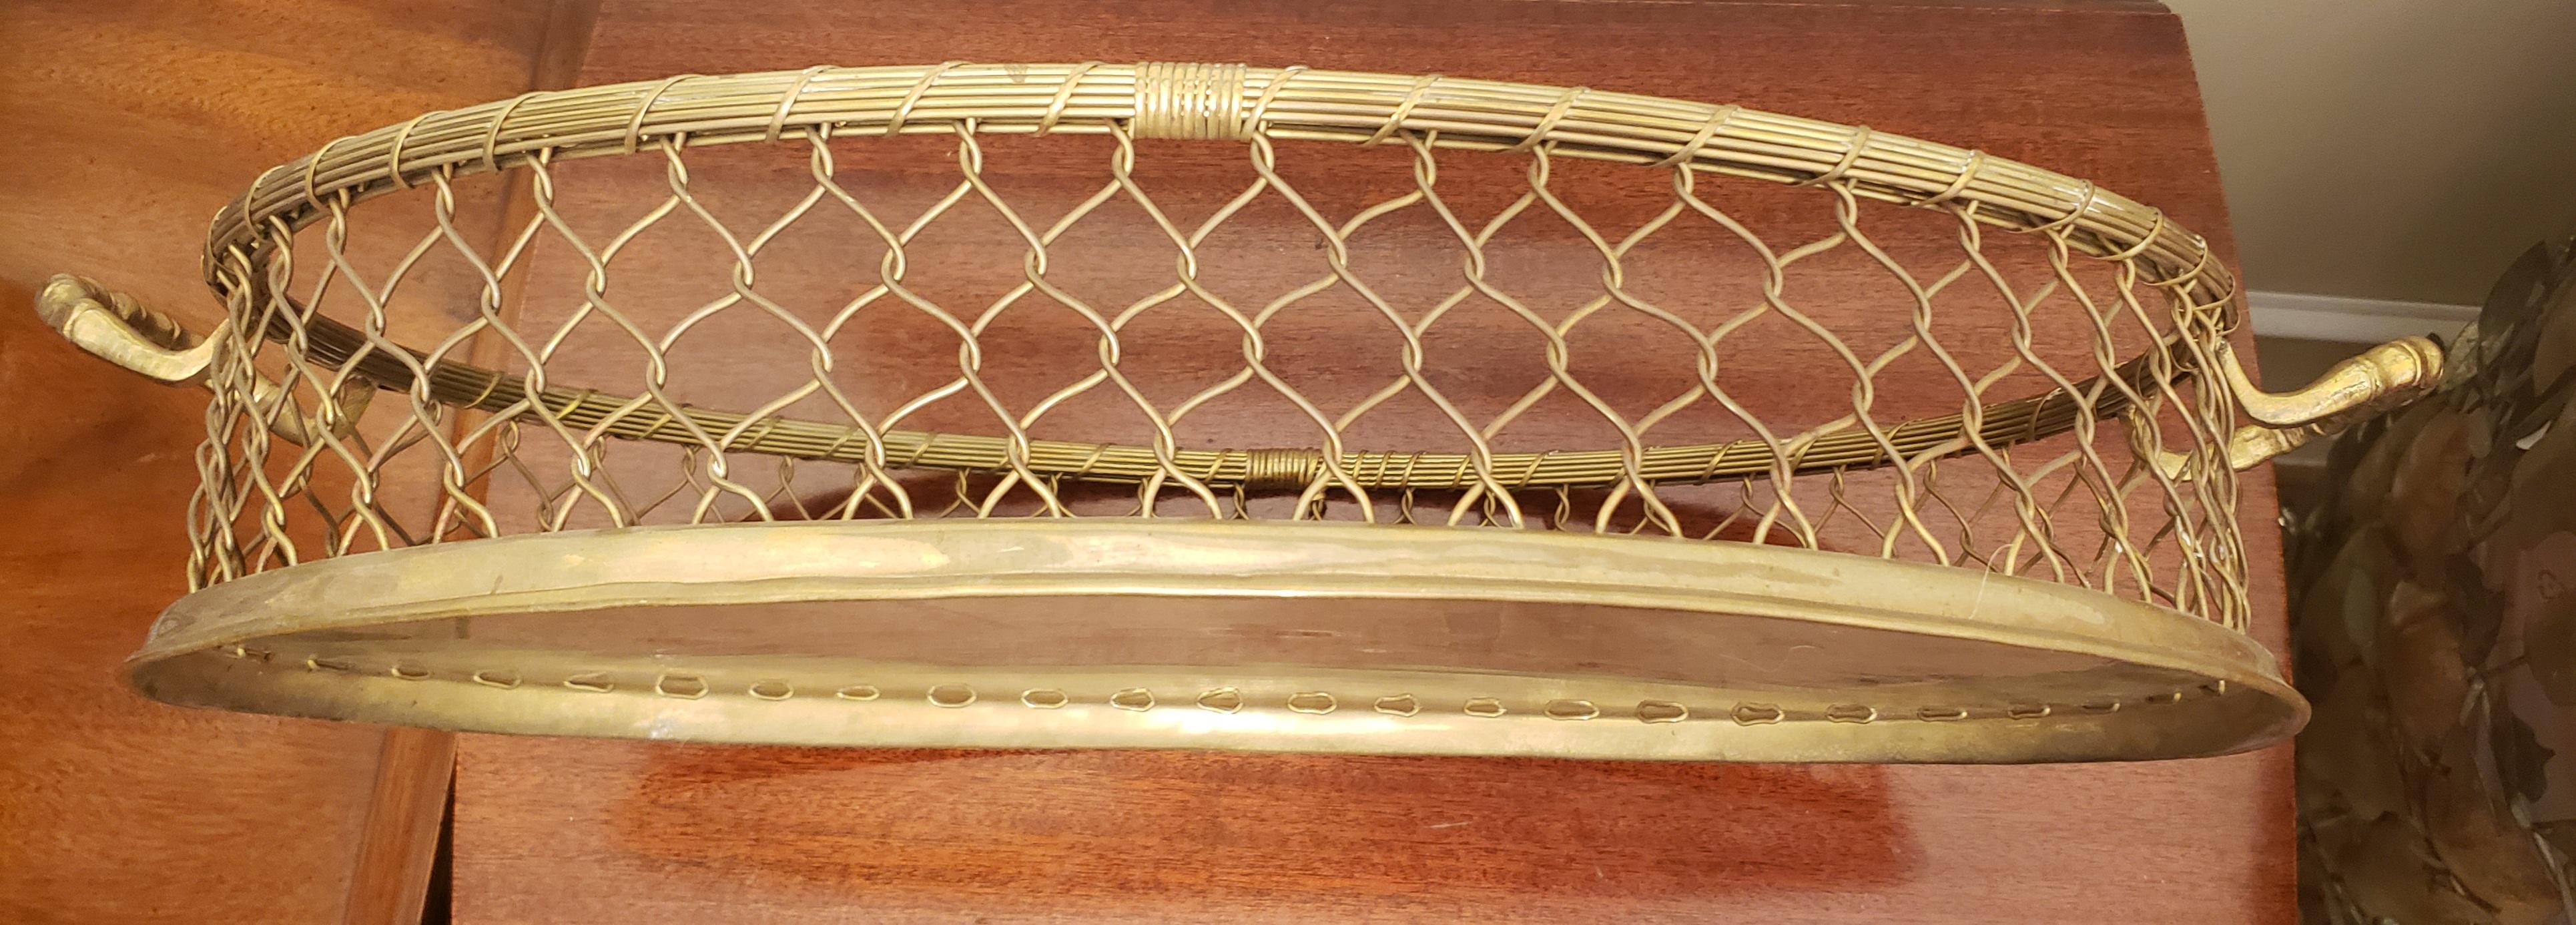 Indian Hollywood Regency Heavy Brass Wire Mesh Oval Serving Tray